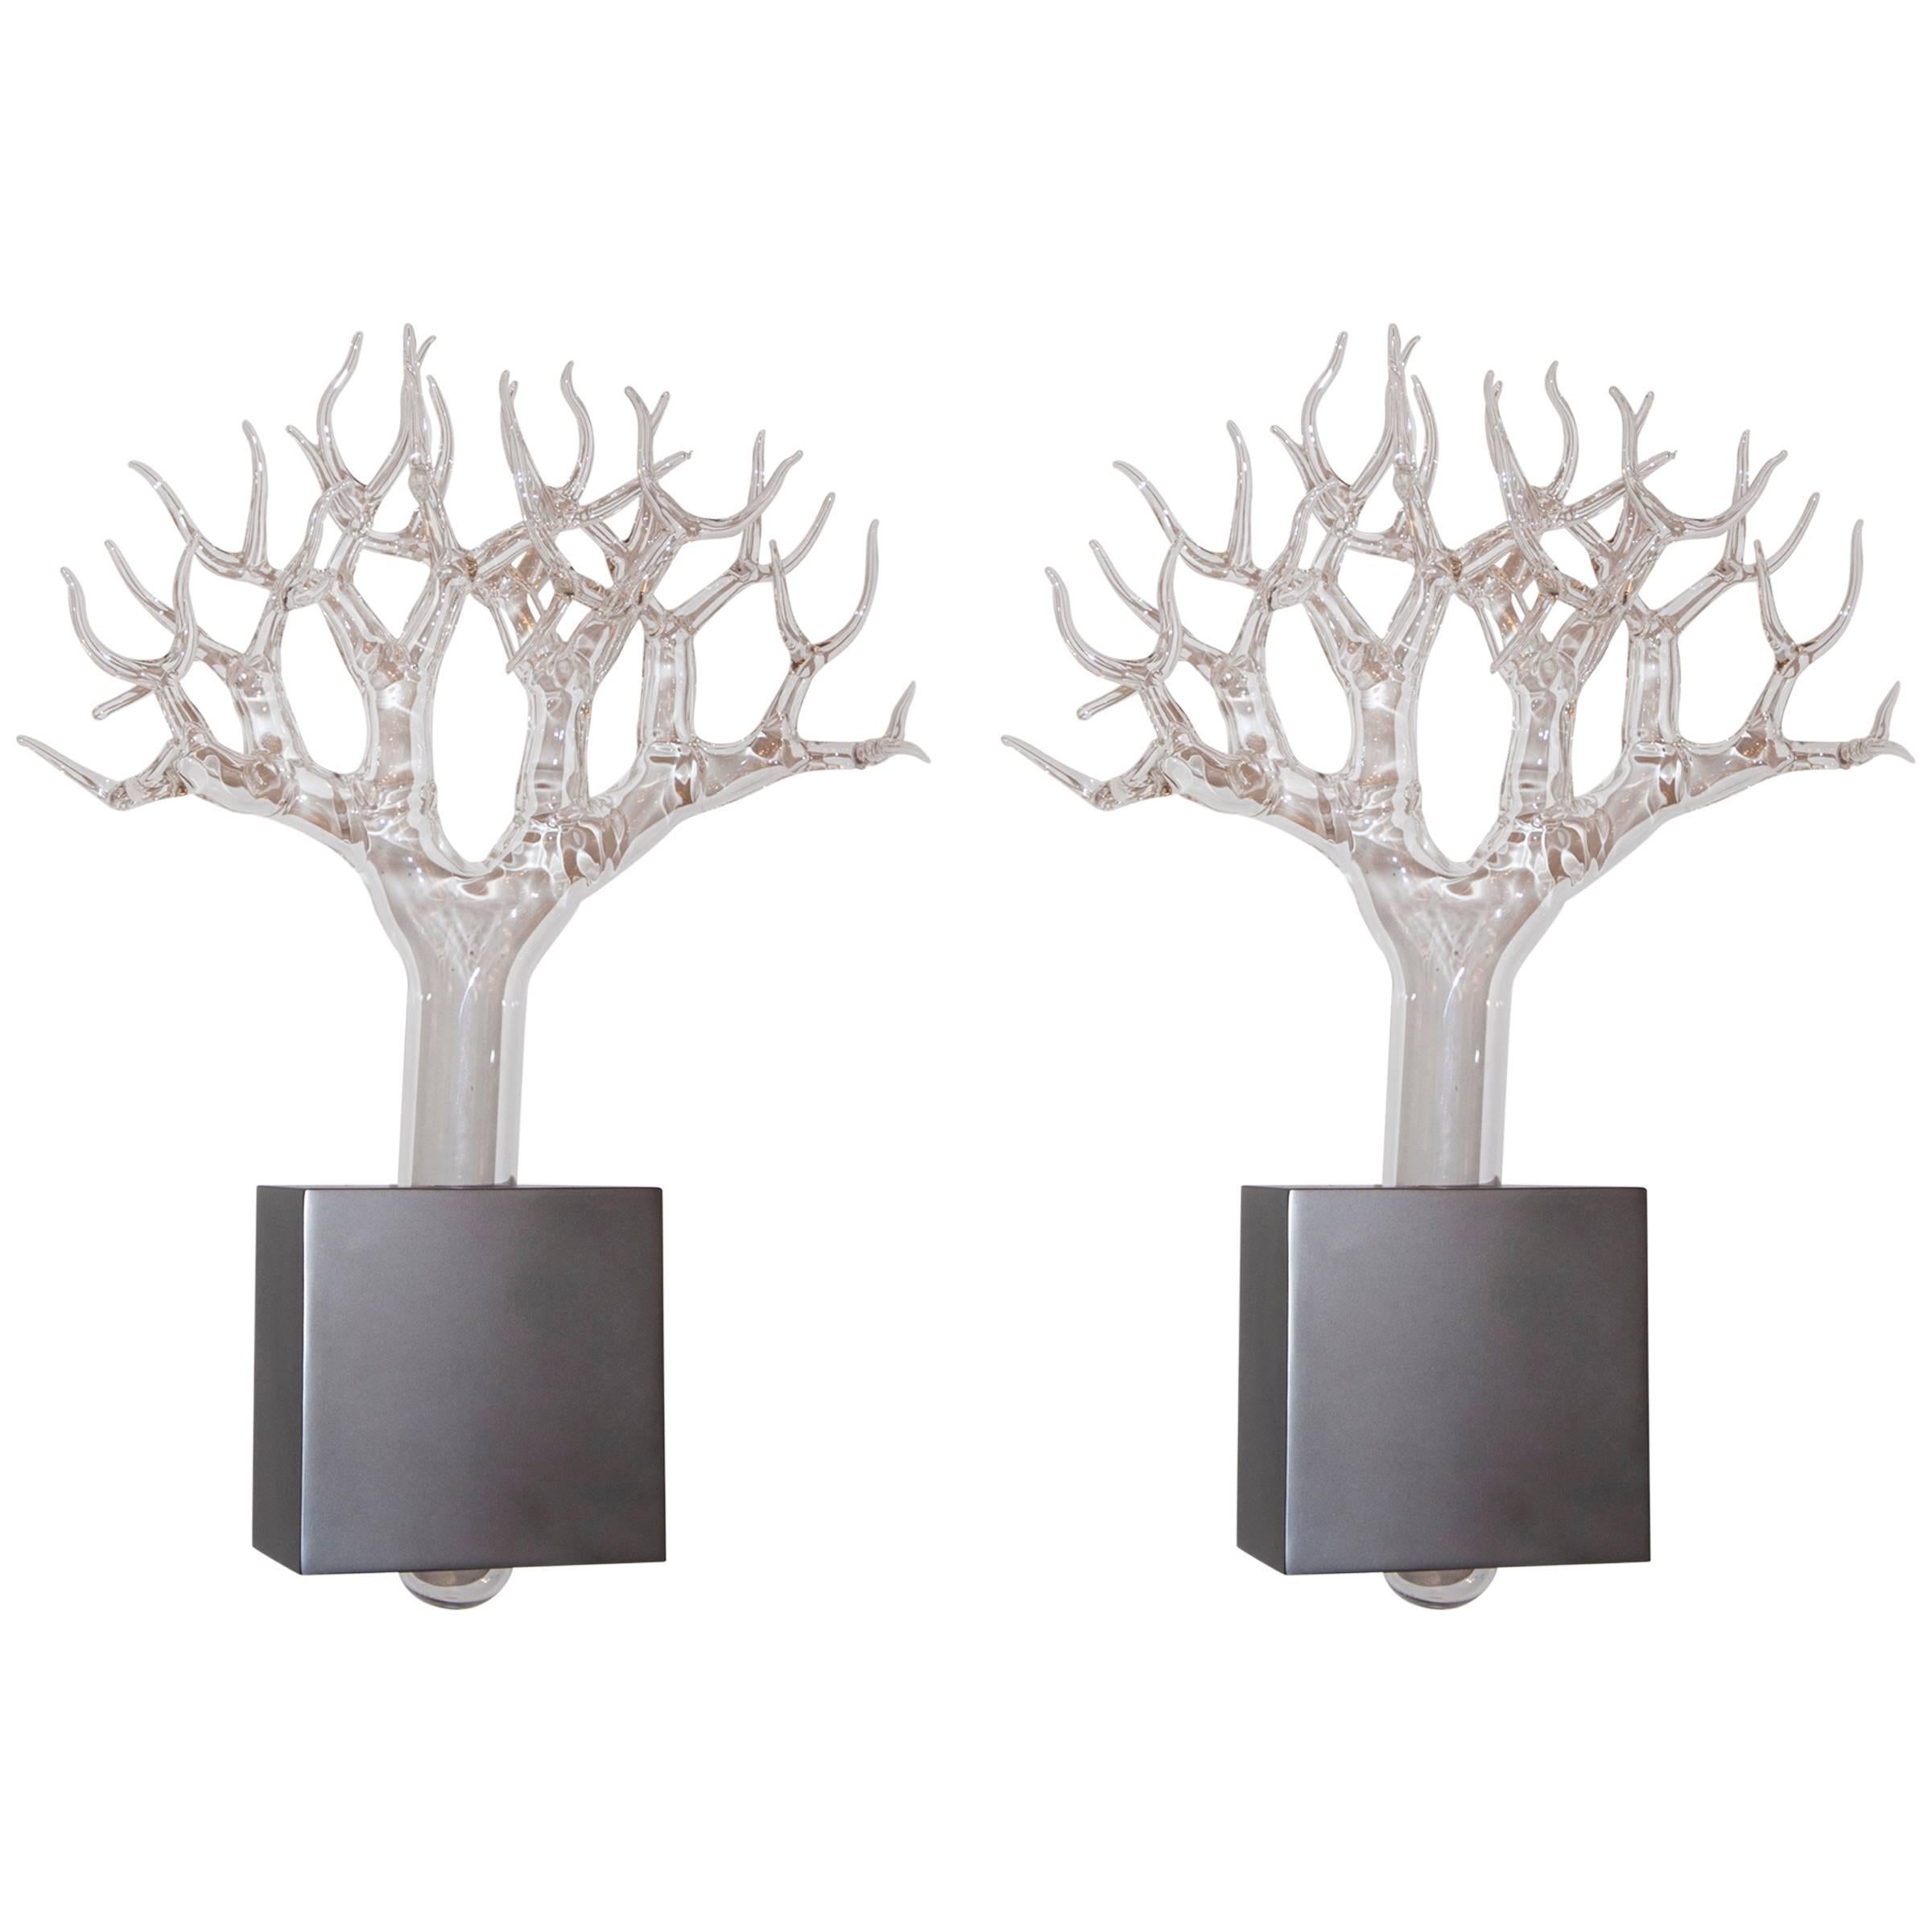 Pair of Sconces by Simone Crestani, Italy, 2013 For Sale